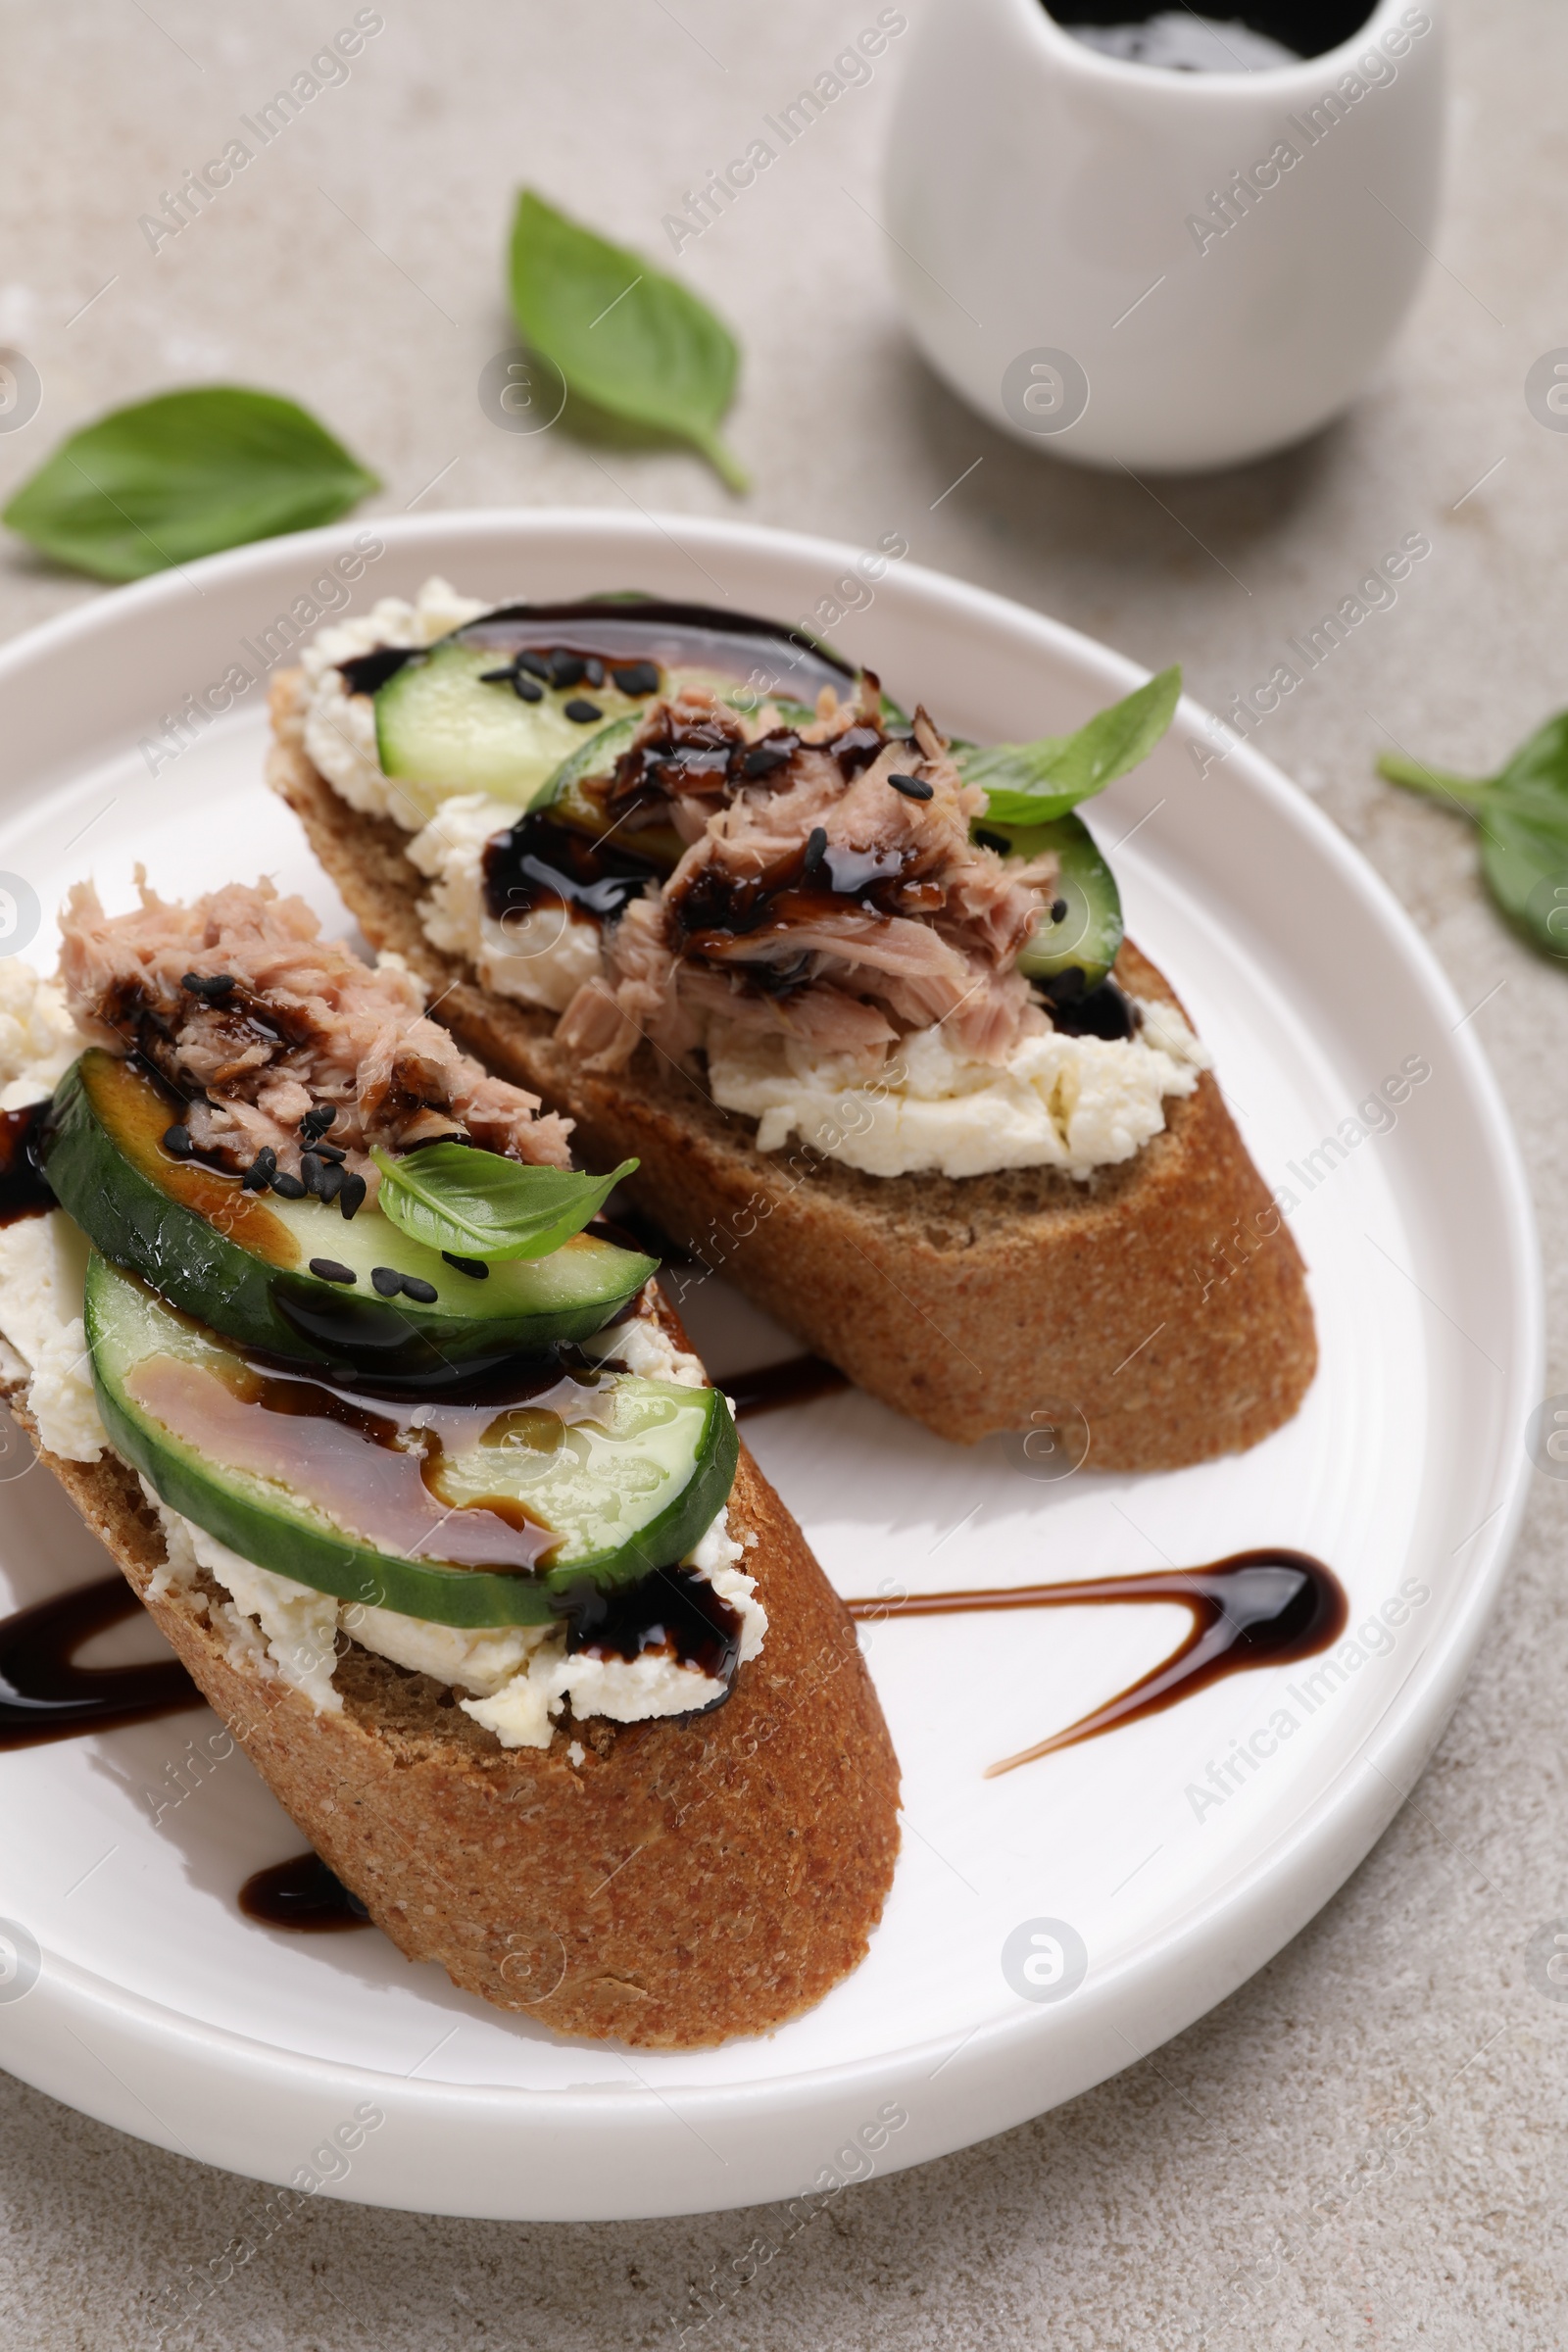 Photo of Delicious bruschettas with balsamic vinegar and toppings on light textured table